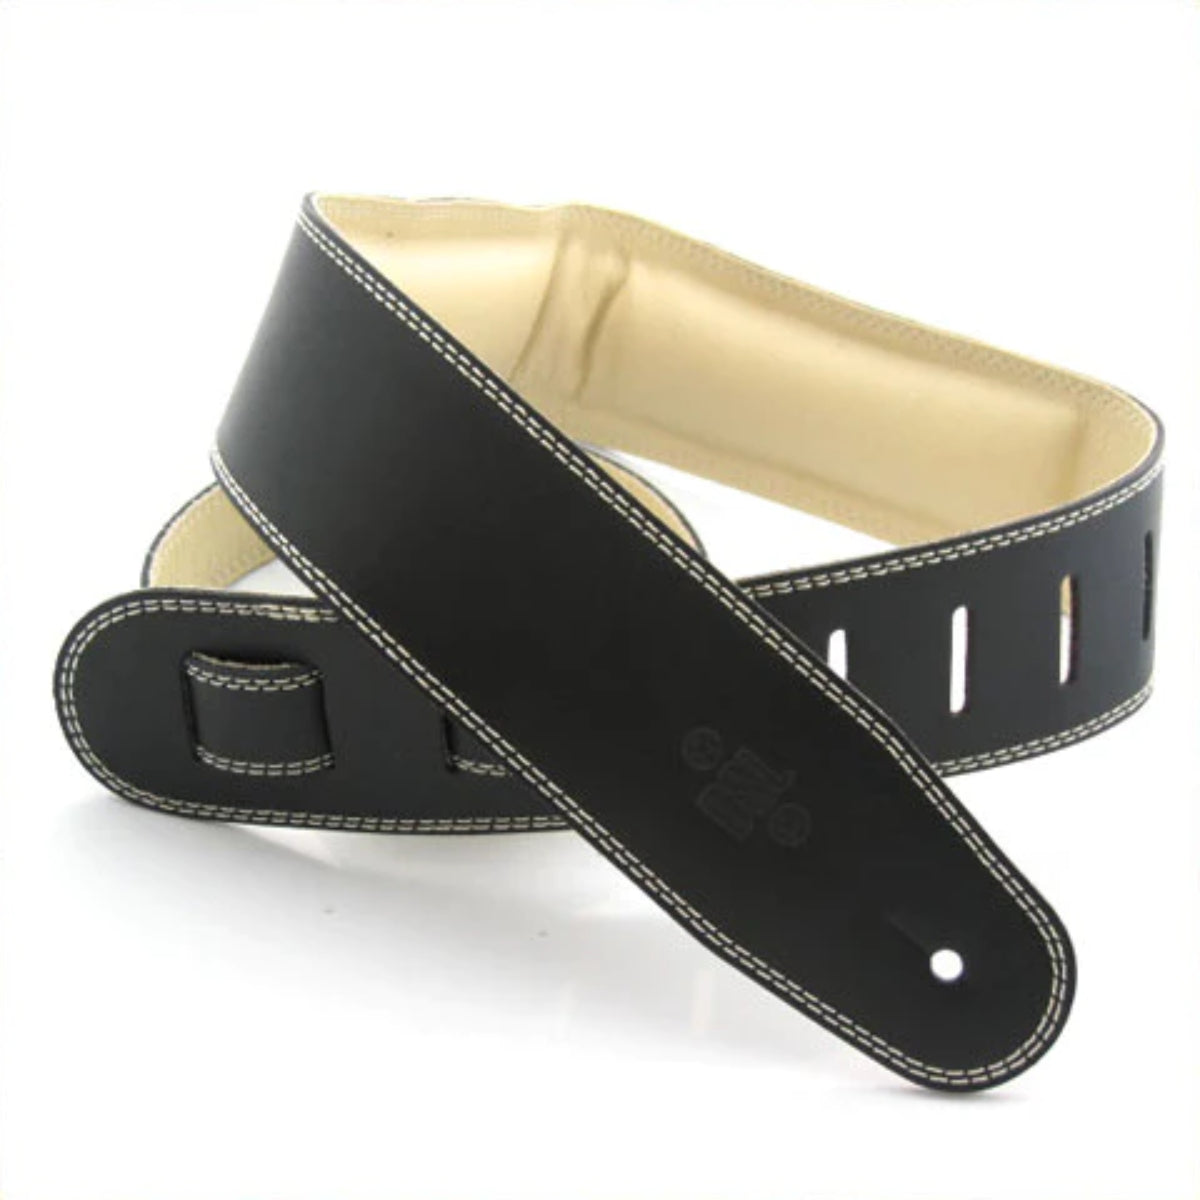 GEG-25-15-3 2.5" Leather Strap, Black With Beige Backing